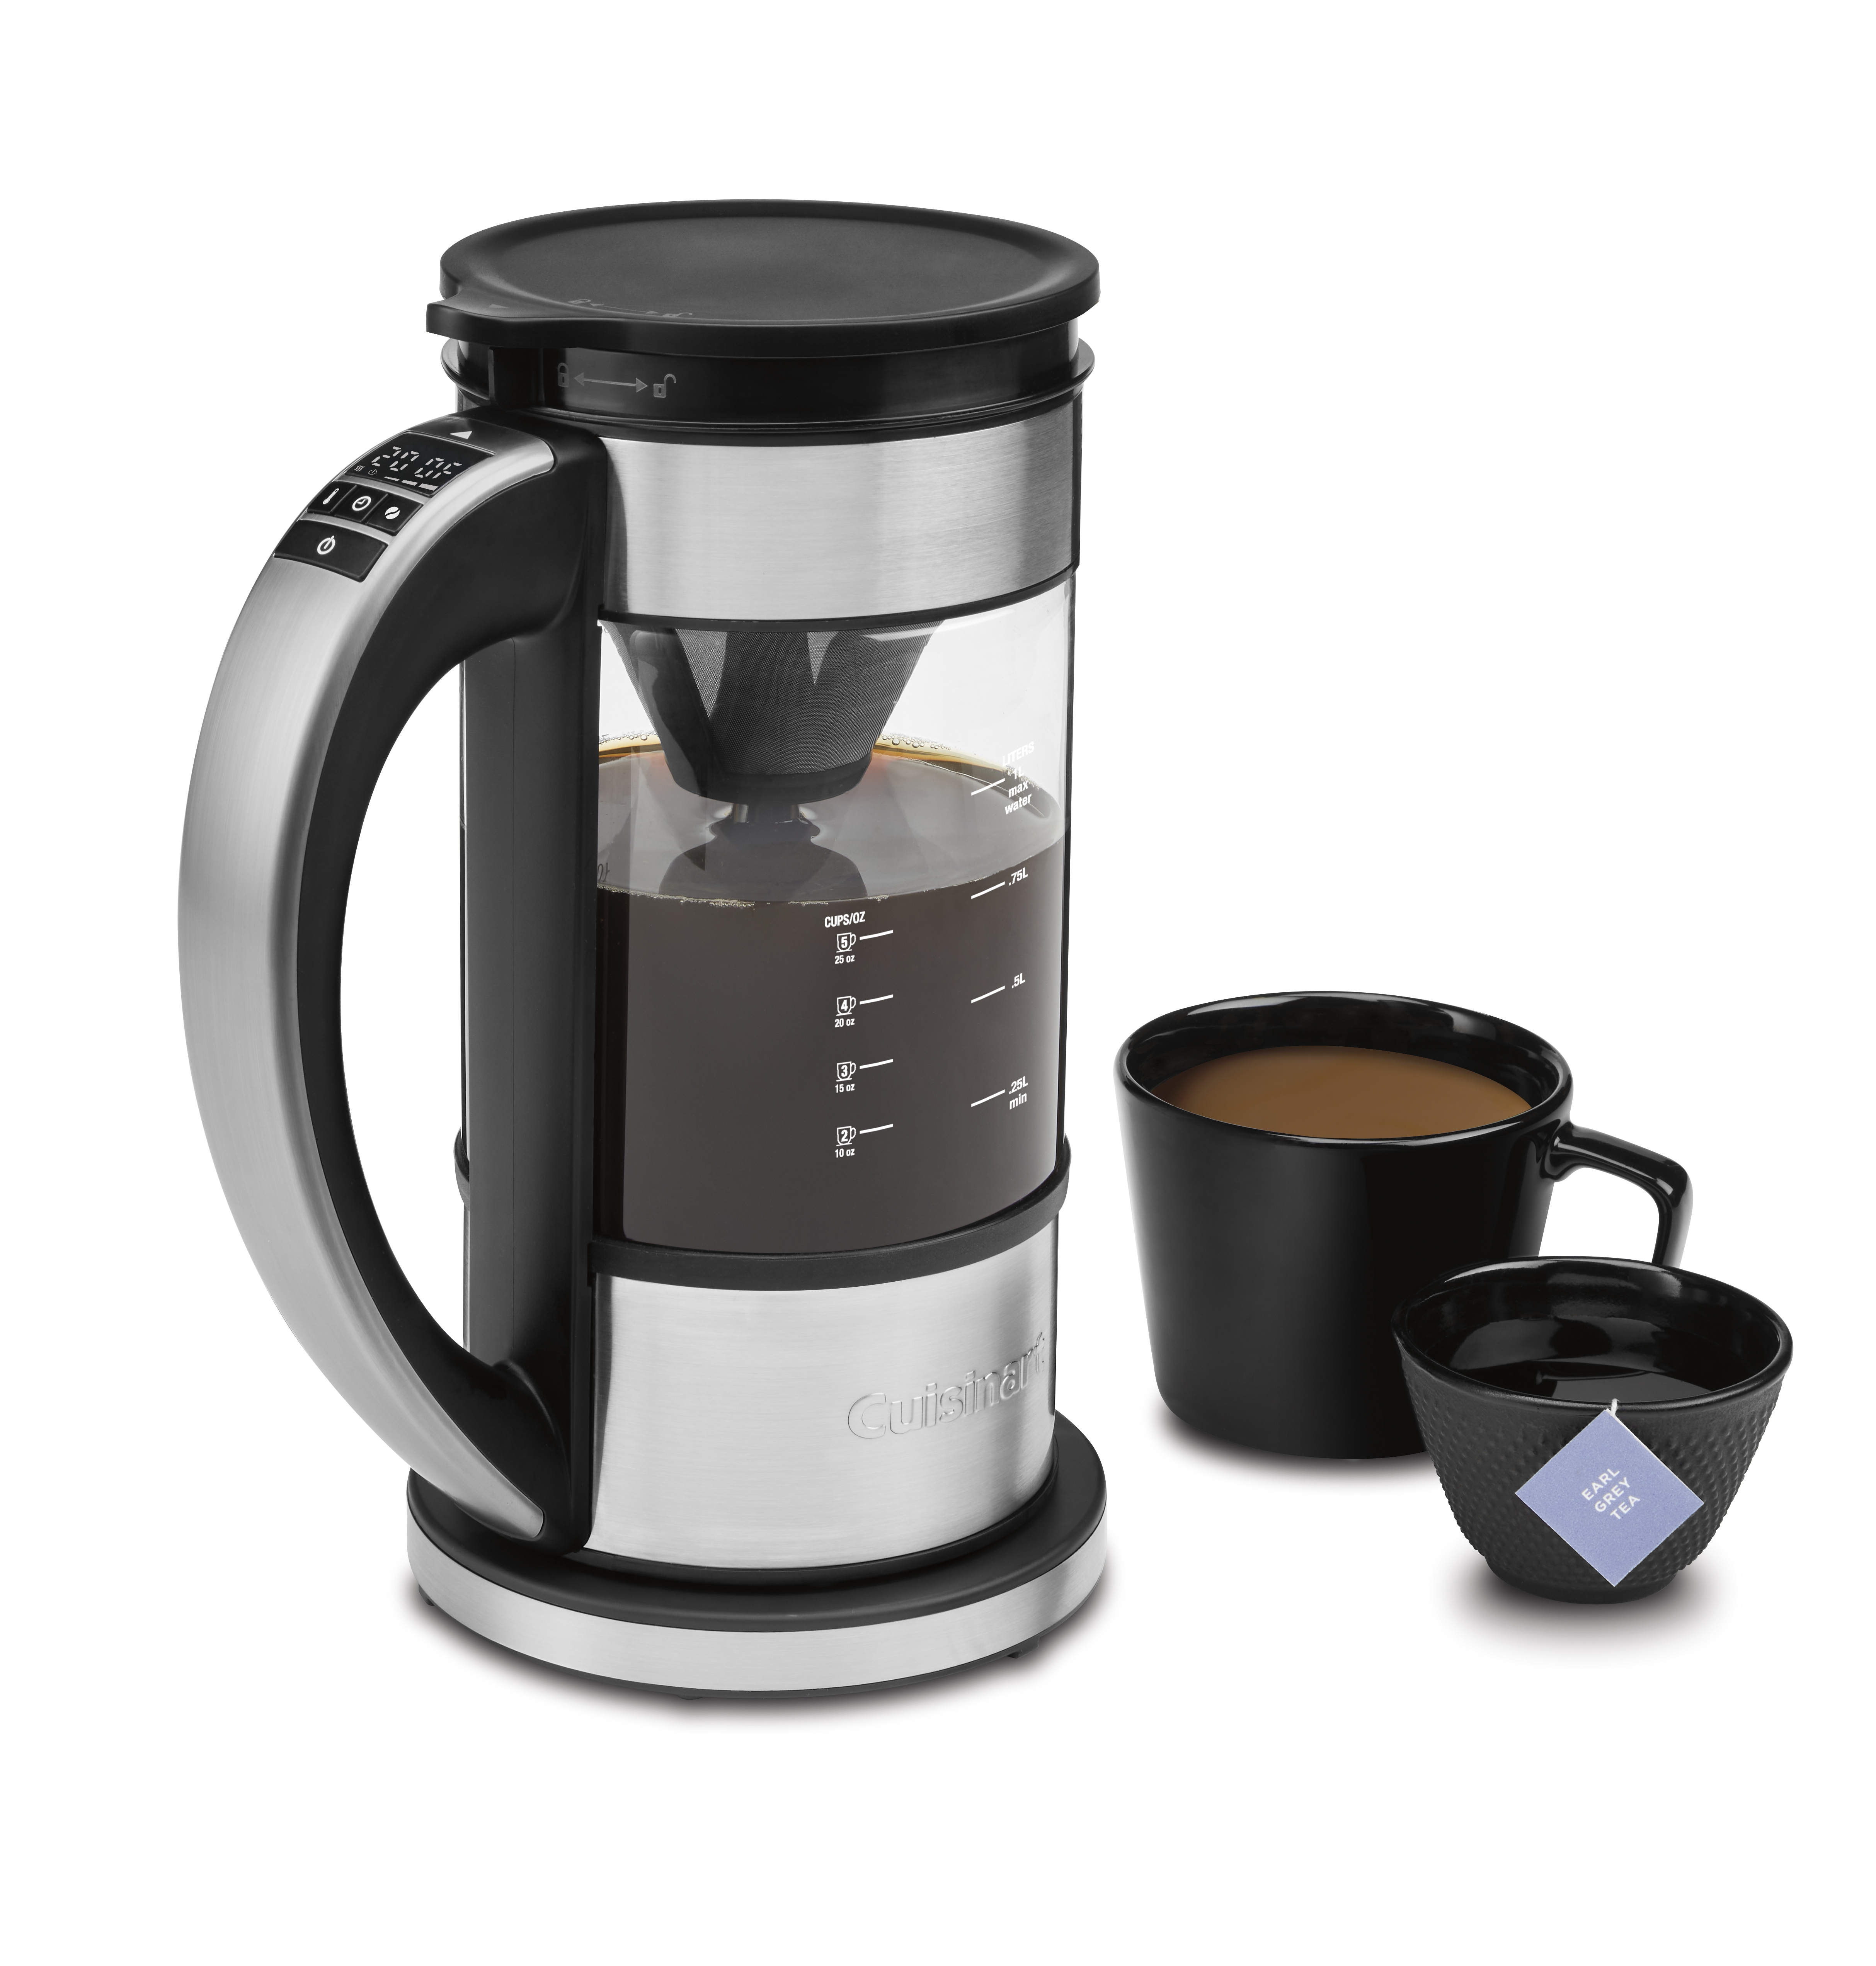 Programmable 5-Cup Percolator & Electric Kettle